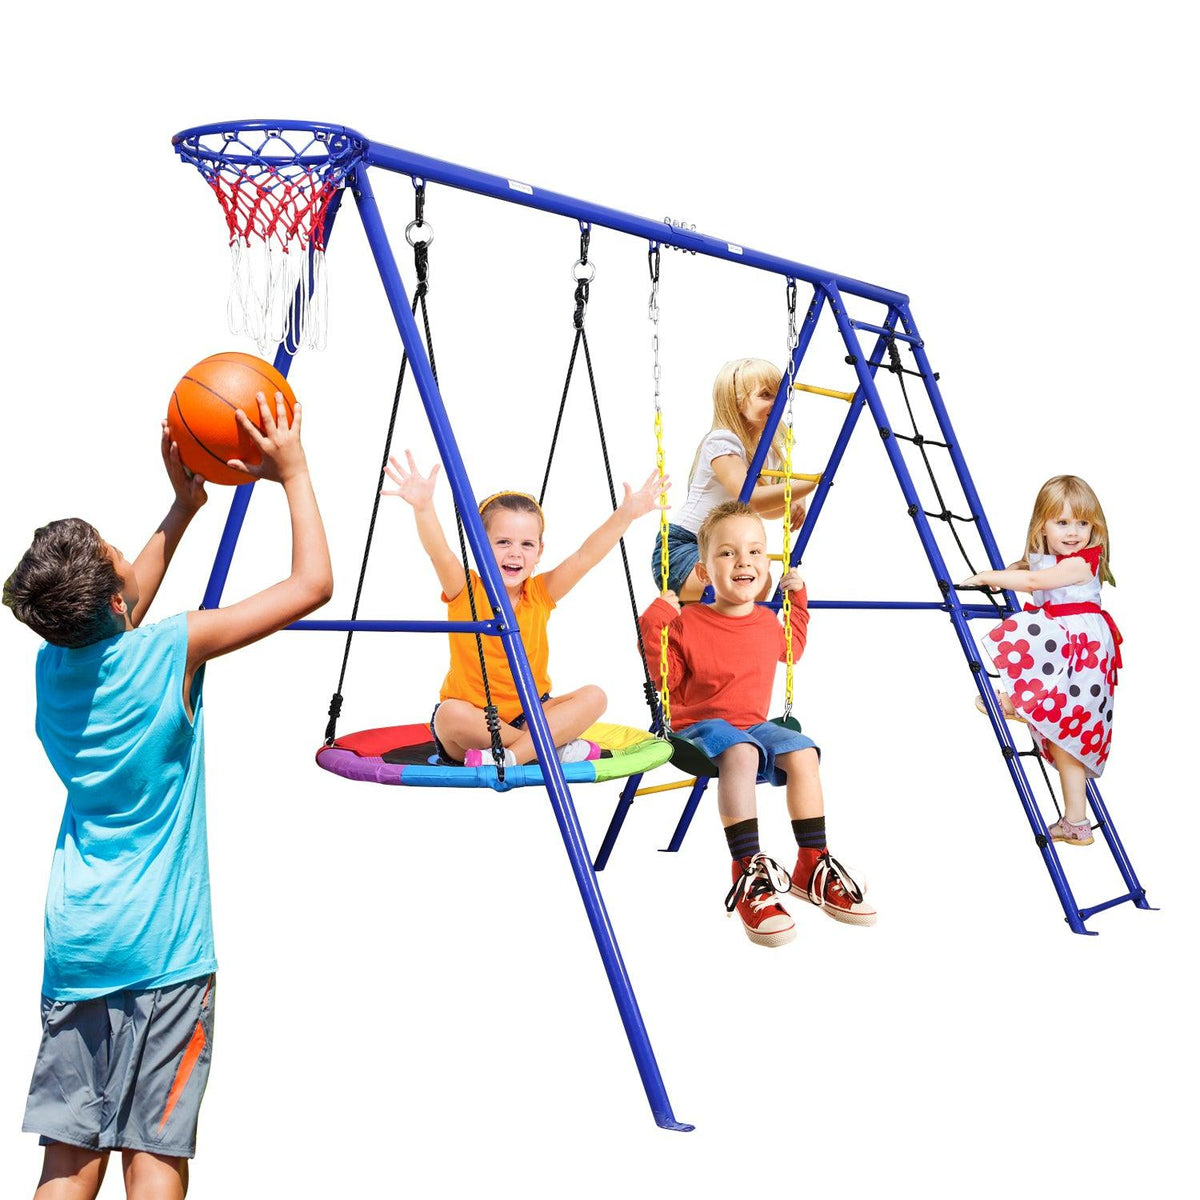 Outdoor Metal Swing Set for Kids with 440lbs Weight Capacity – Autojoy